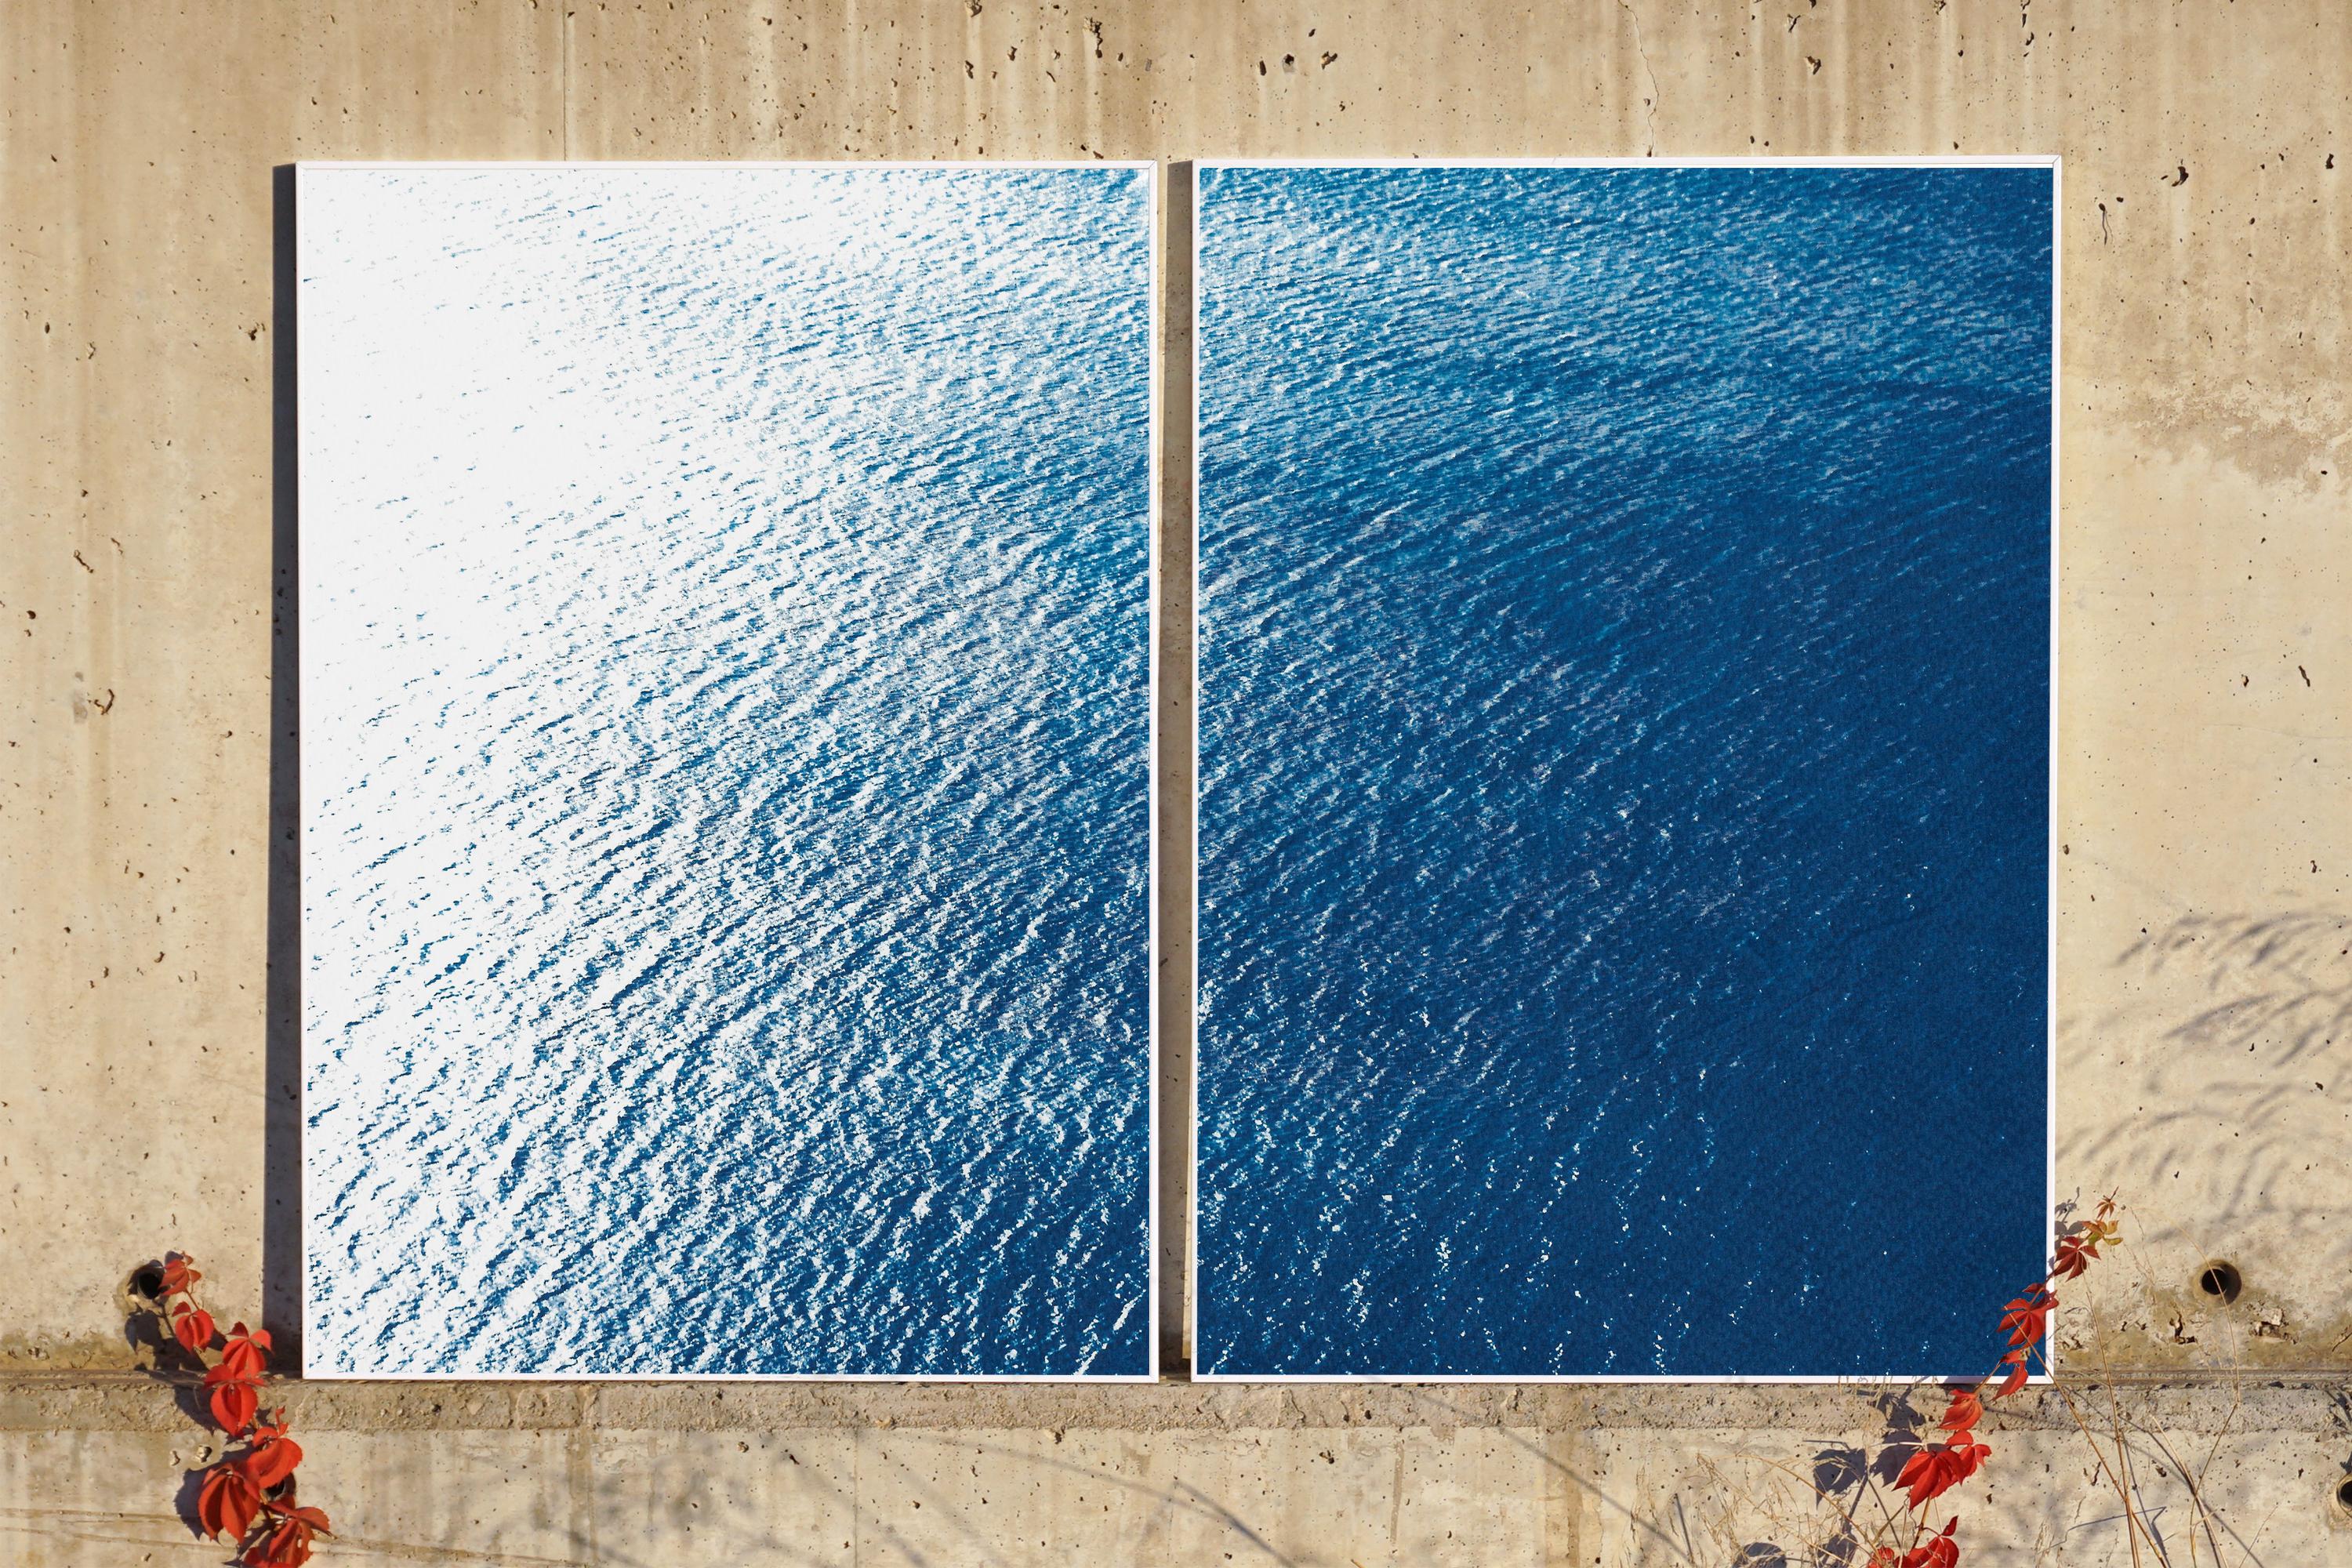 Smooth Bay in the Mediterranean, Classic Blue Diptych, Zen Seascape Coastal Life - Painting by Kind of Cyan